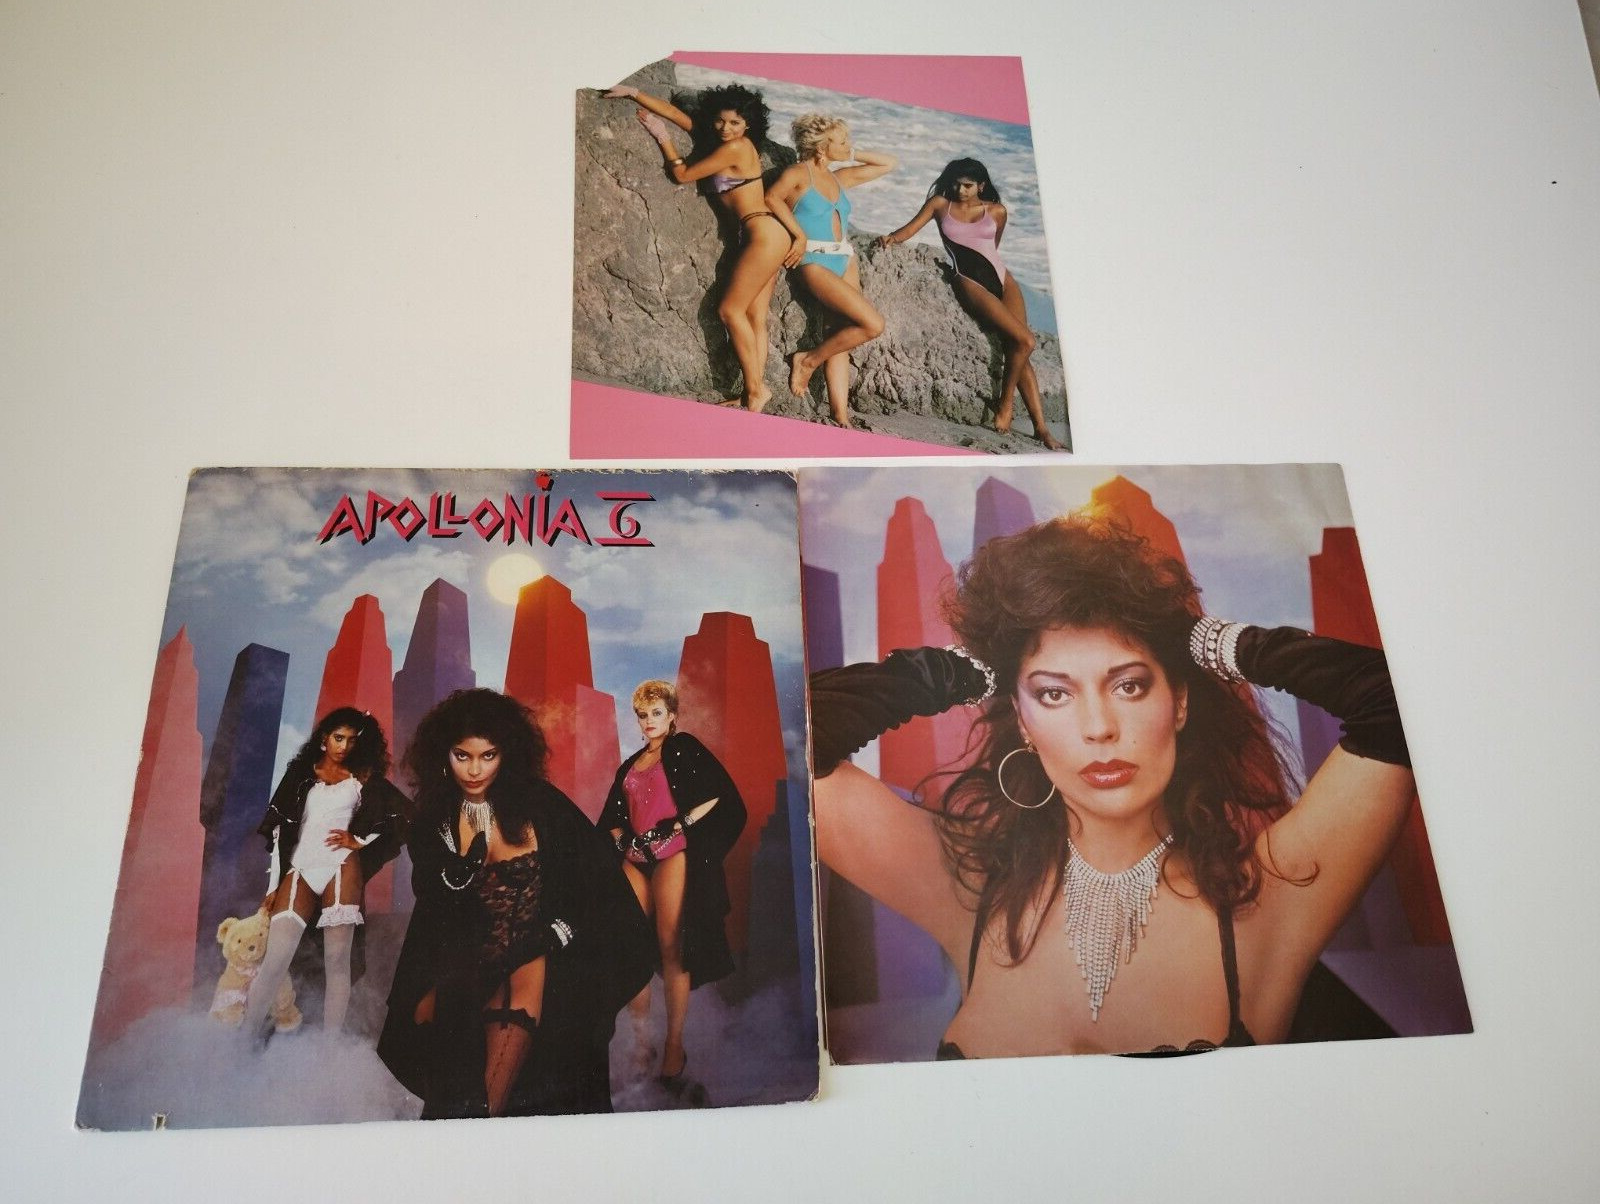 APOLLONIA 6 - S/T / WARNER BROTHERS RECORDS 1984